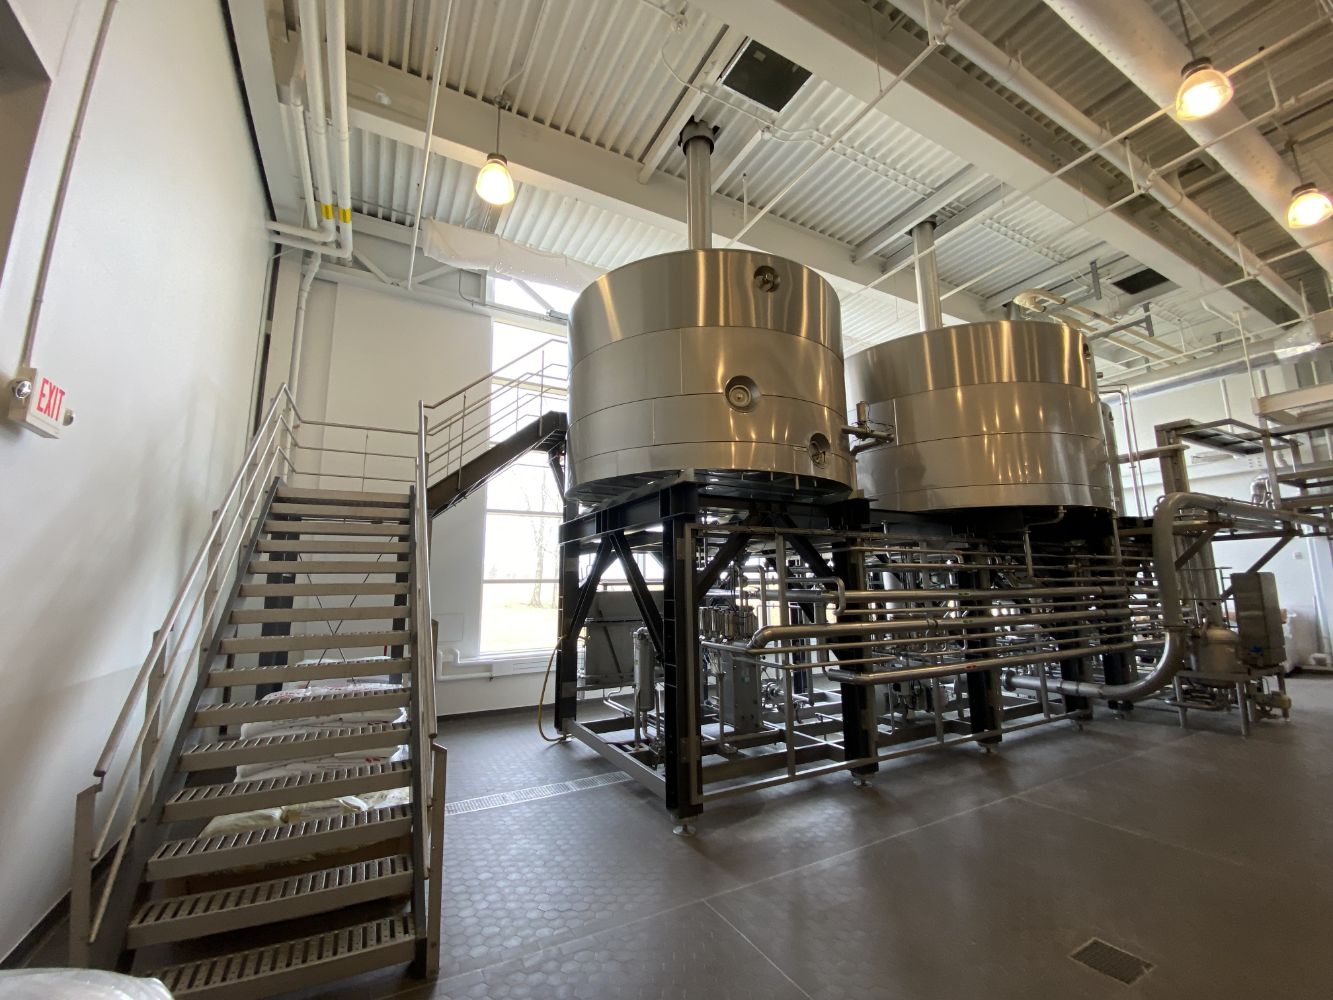 BREWING & BOTTLING FACILITY - STATE OF THE ART KRONES 50-BARREL BREWERY - KOSME BOTTLING LINE (ALL LIKE NEW)